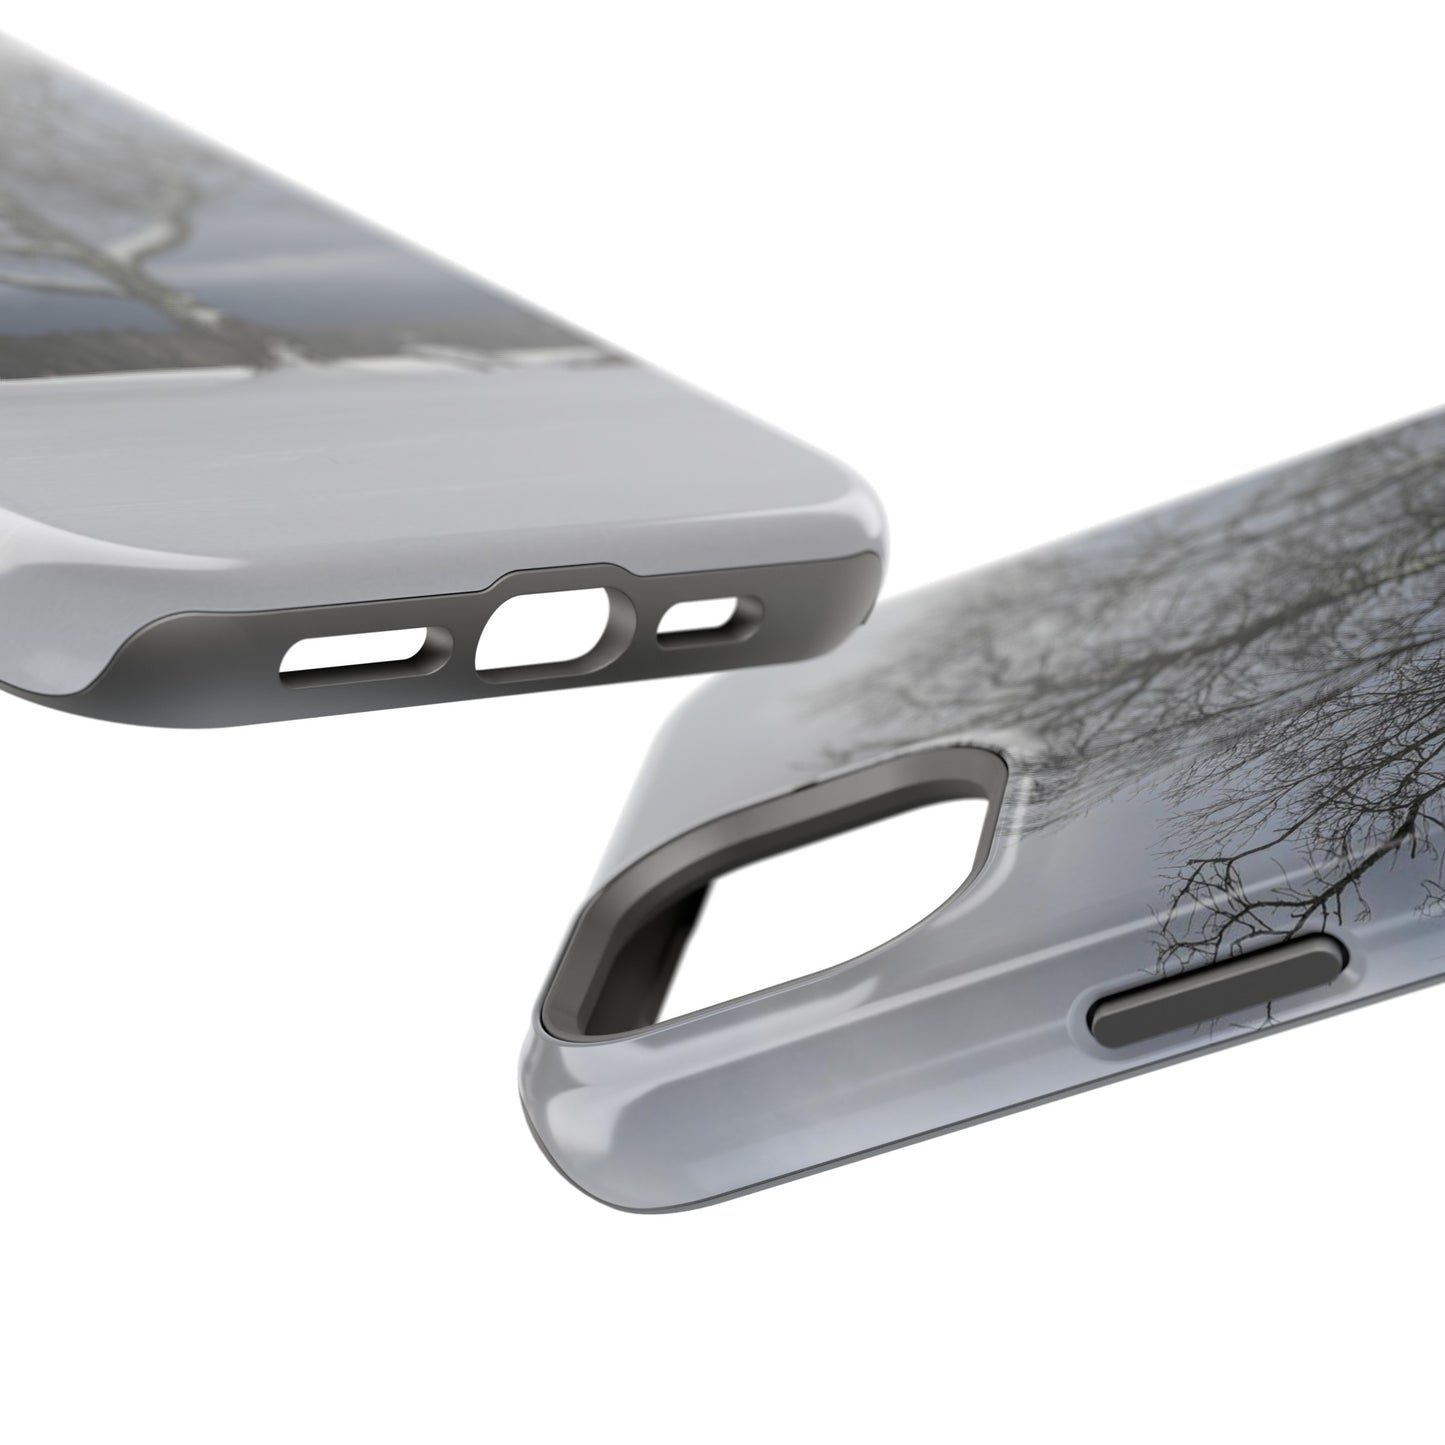 MagSafe Impact Resistant Phone Case - Lone Tree